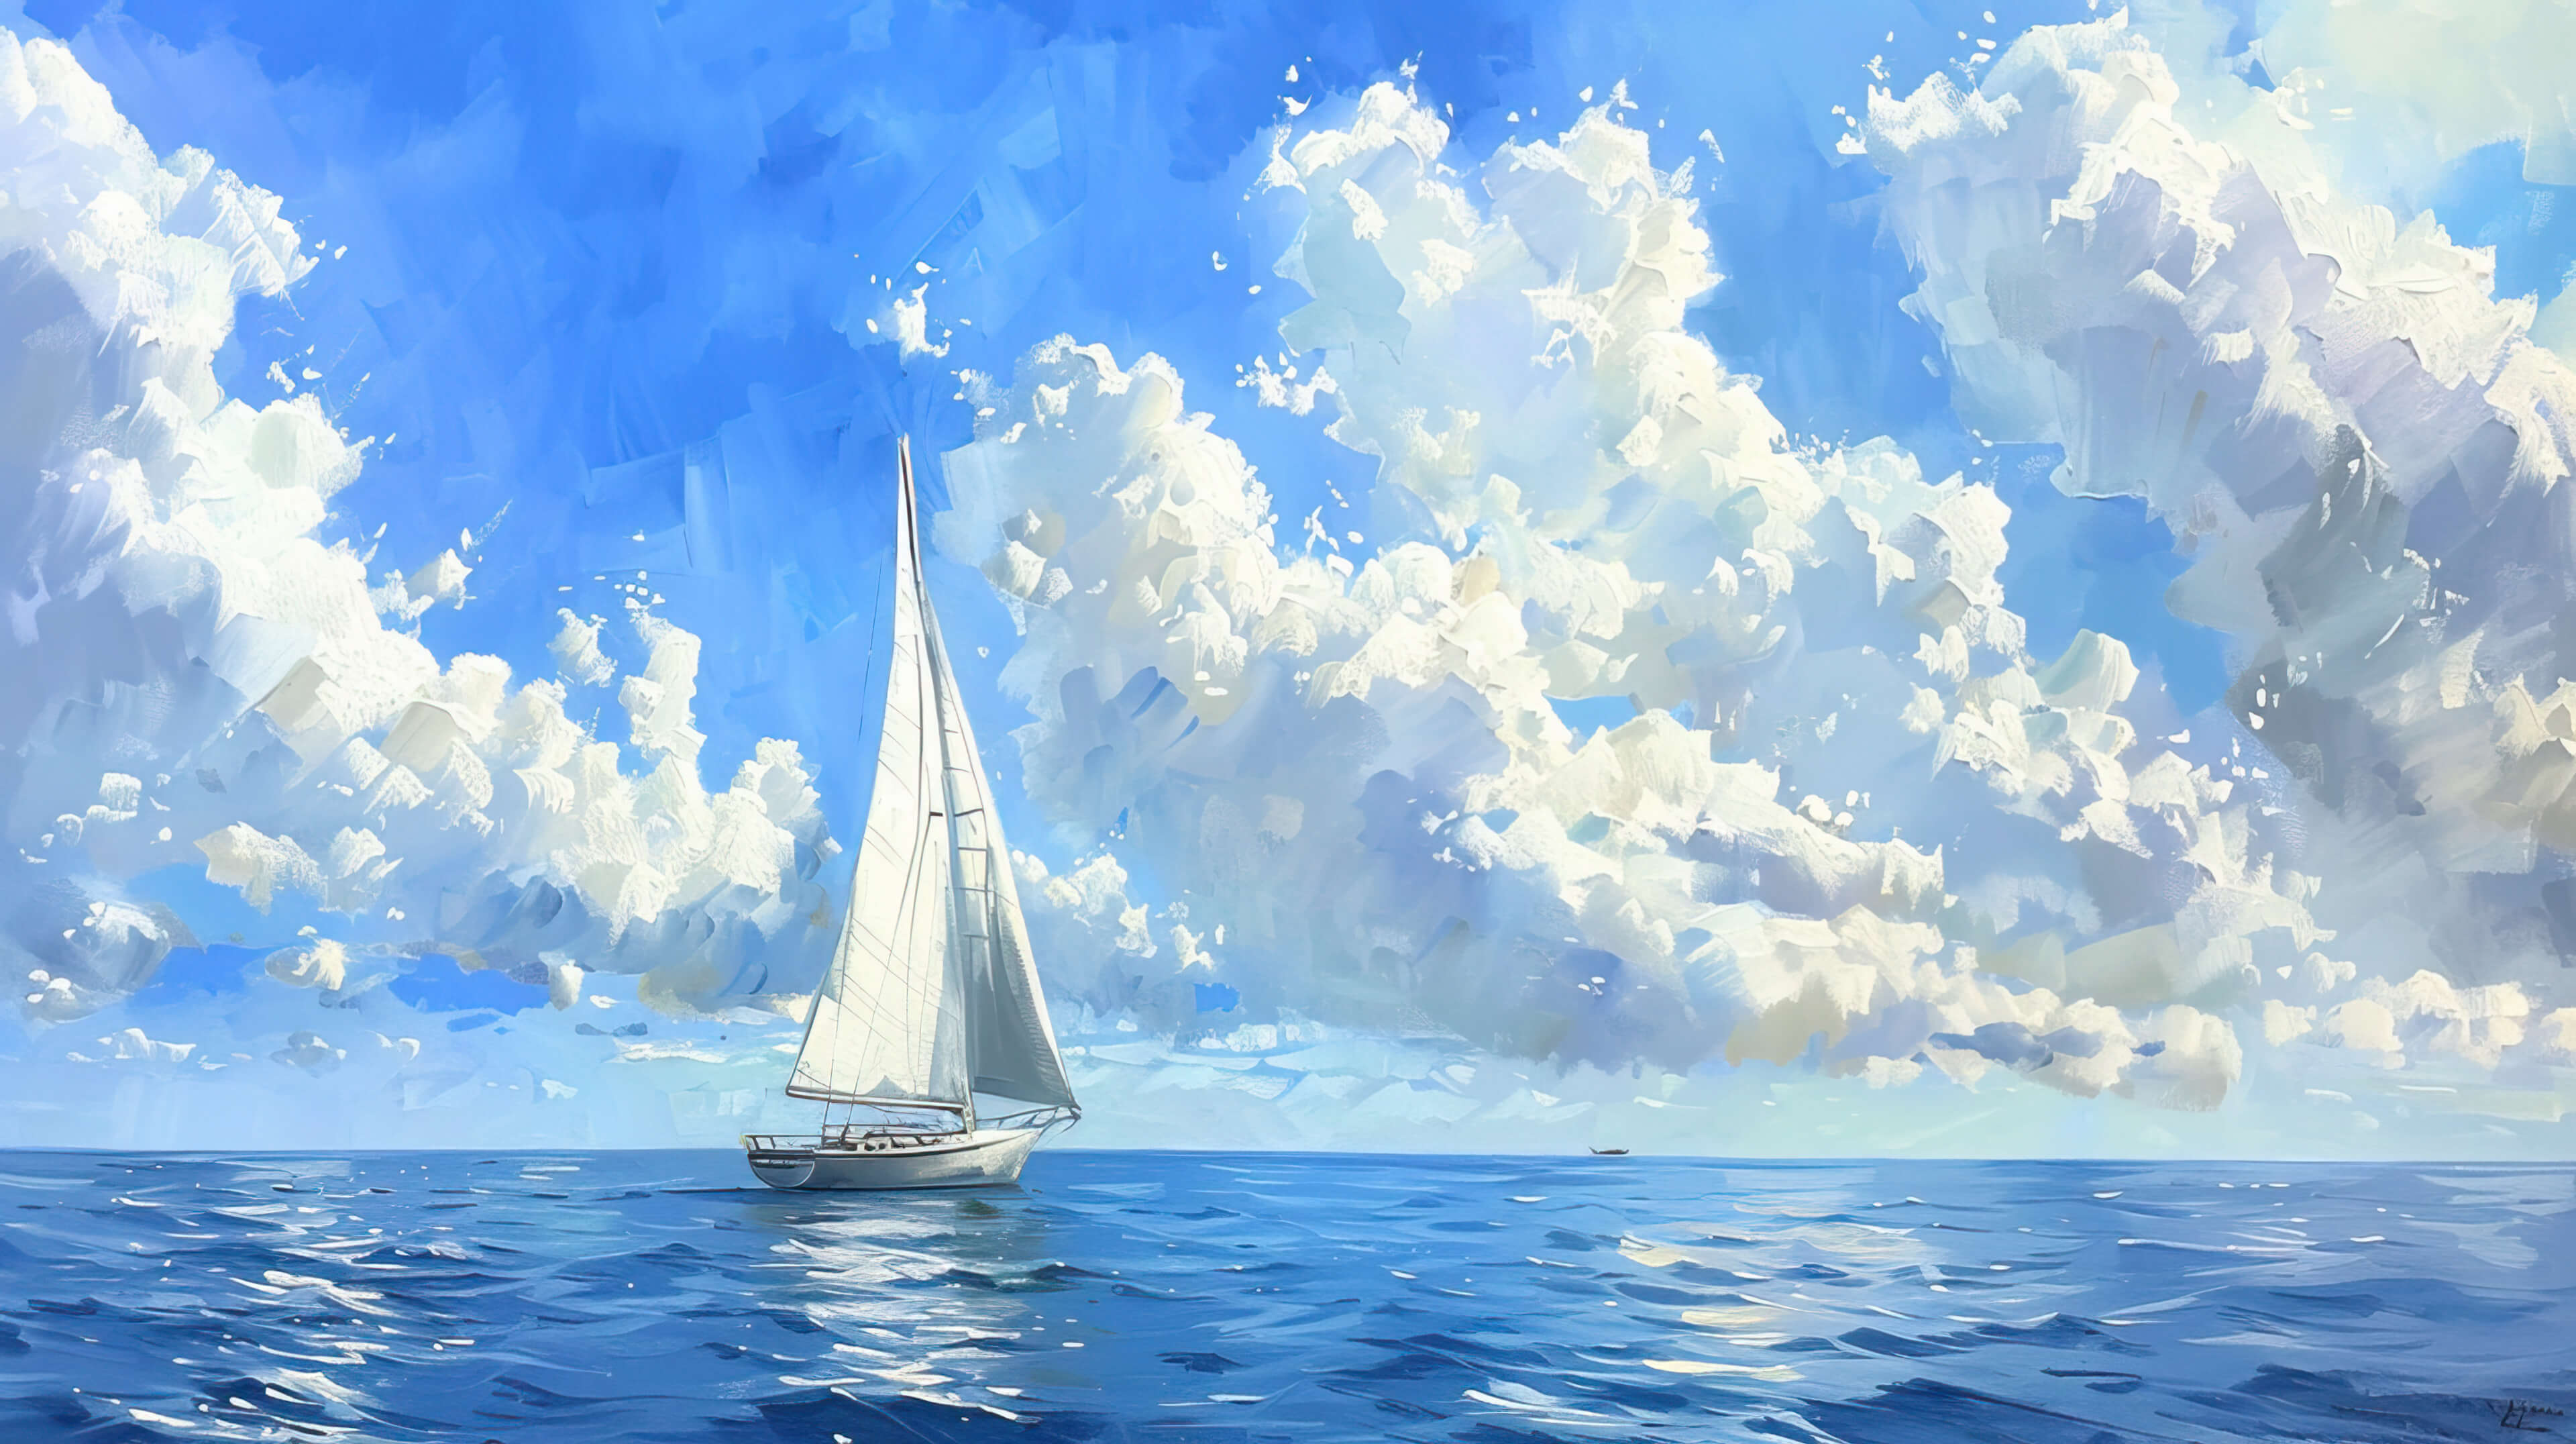 A serene seascape with a sailboat gliding across calm waters, its white sails billowing in the gentle breeze against a backdrop of blue skies and fluffy clouds